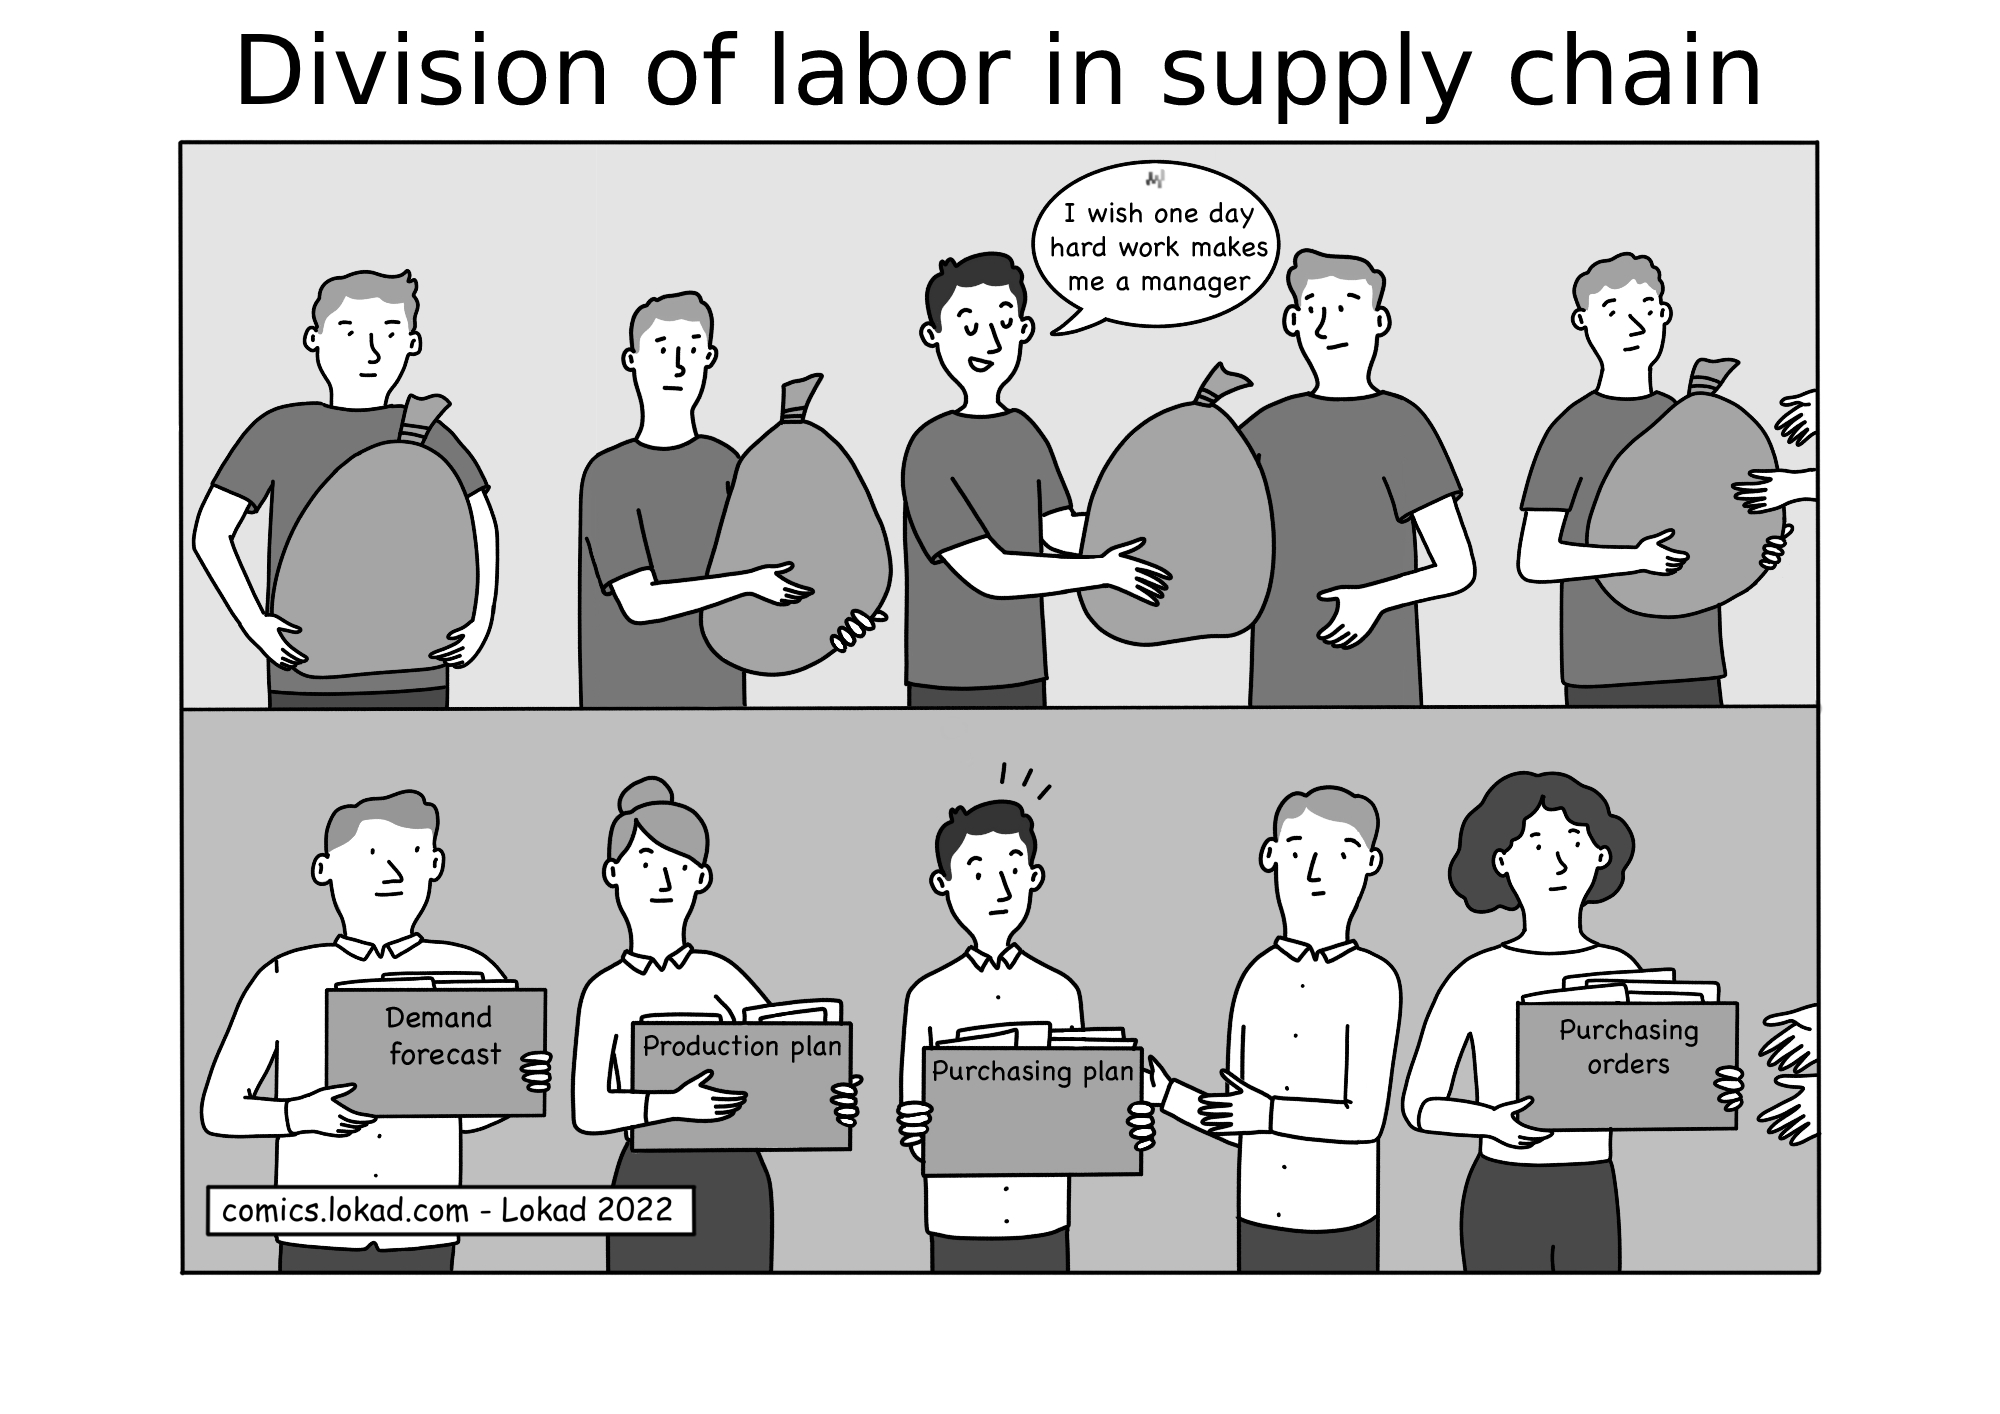 Division of labor in supply chain